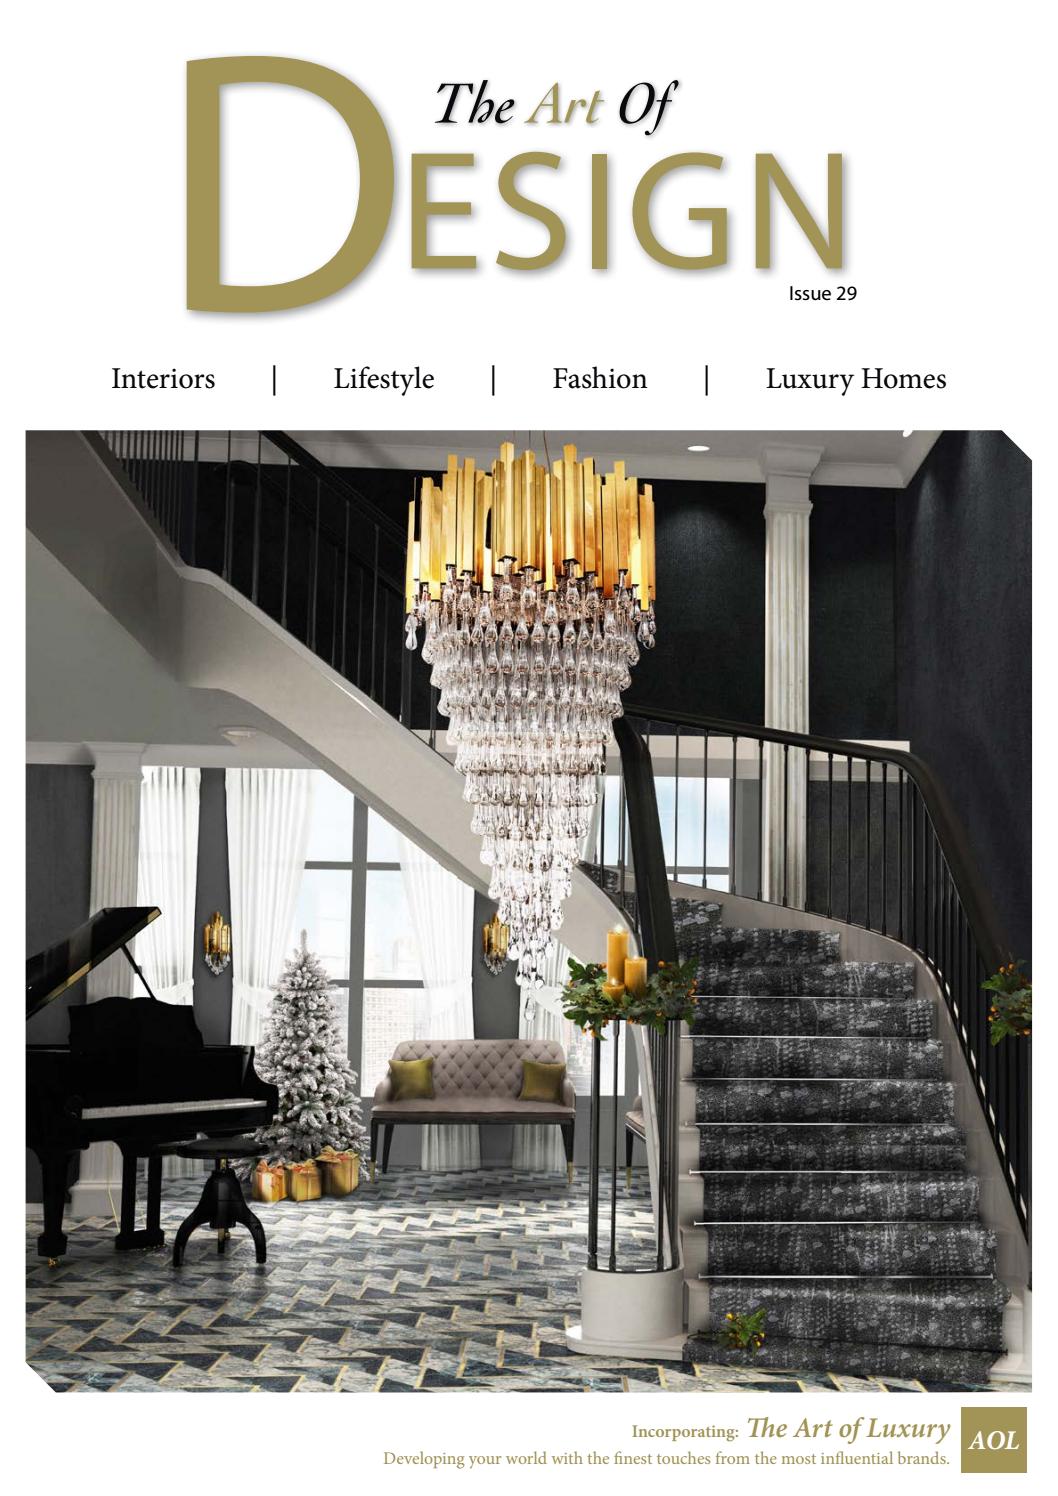 Davinci Custom Fireplace Awesome the Art Of Design issue 29 2017 by Mh Media Global issuu